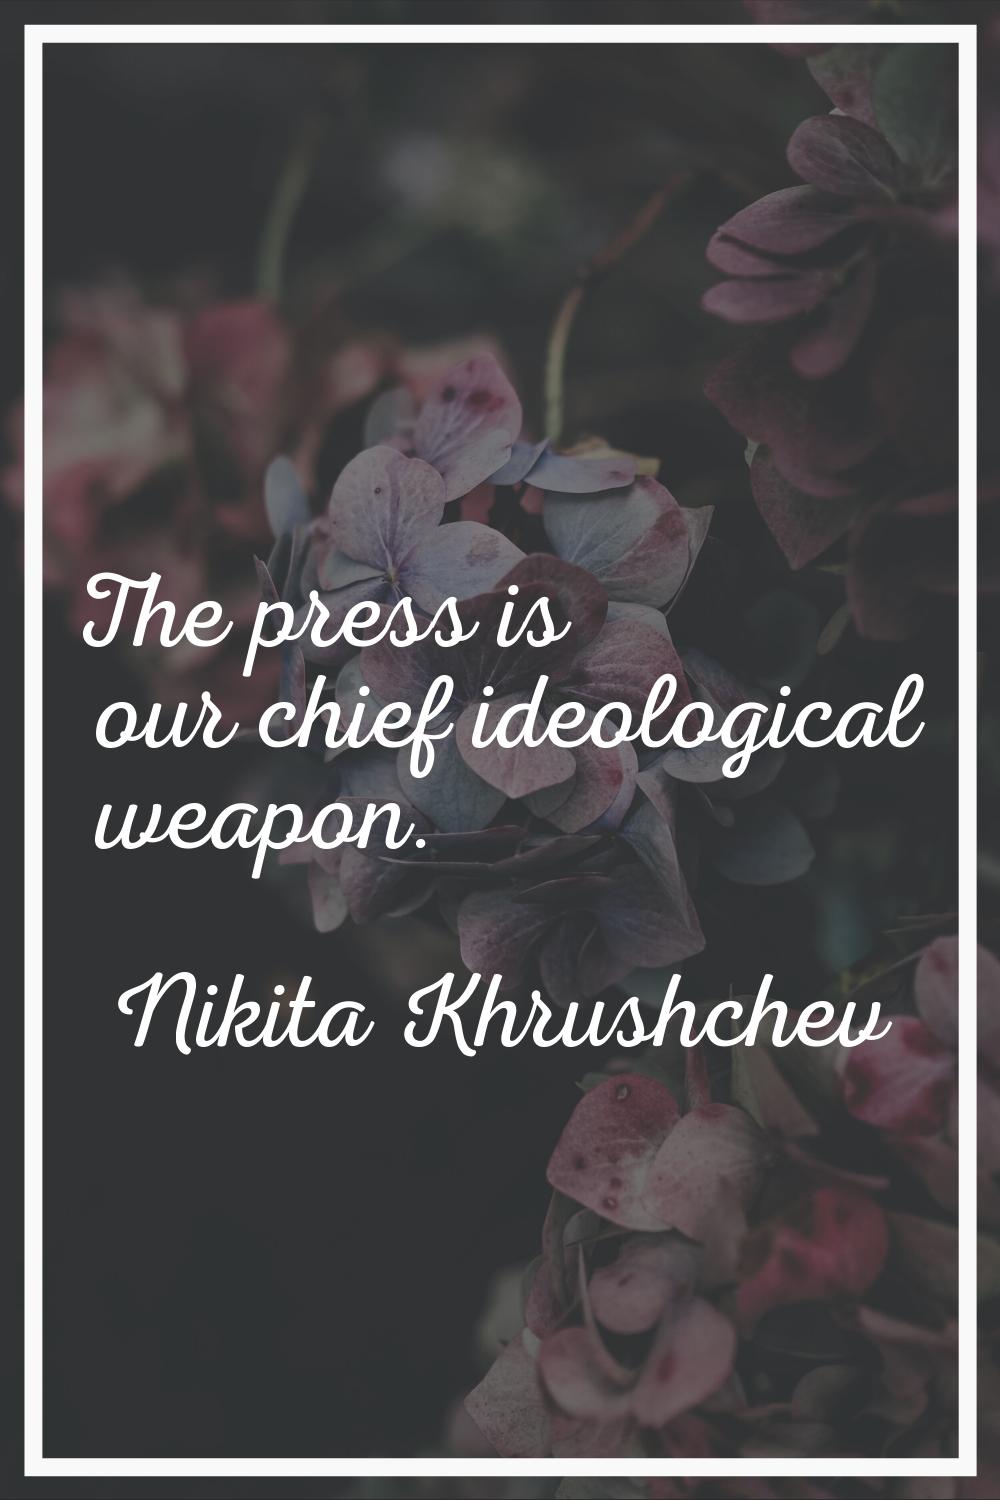 The press is our chief ideological weapon.